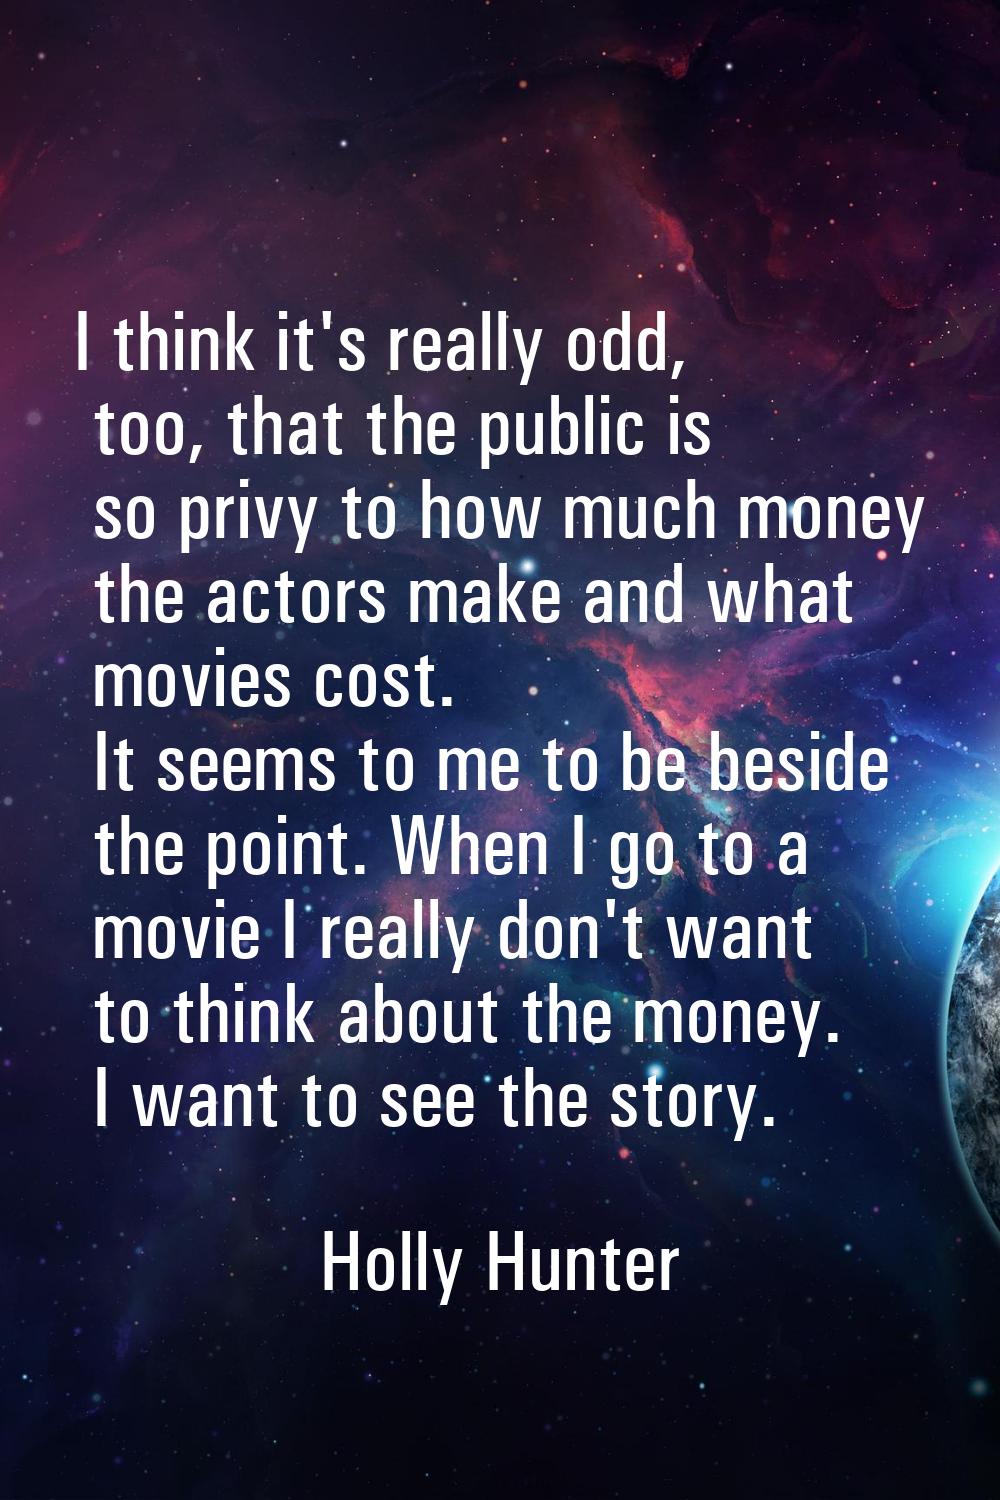 I think it's really odd, too, that the public is so privy to how much money the actors make and wha